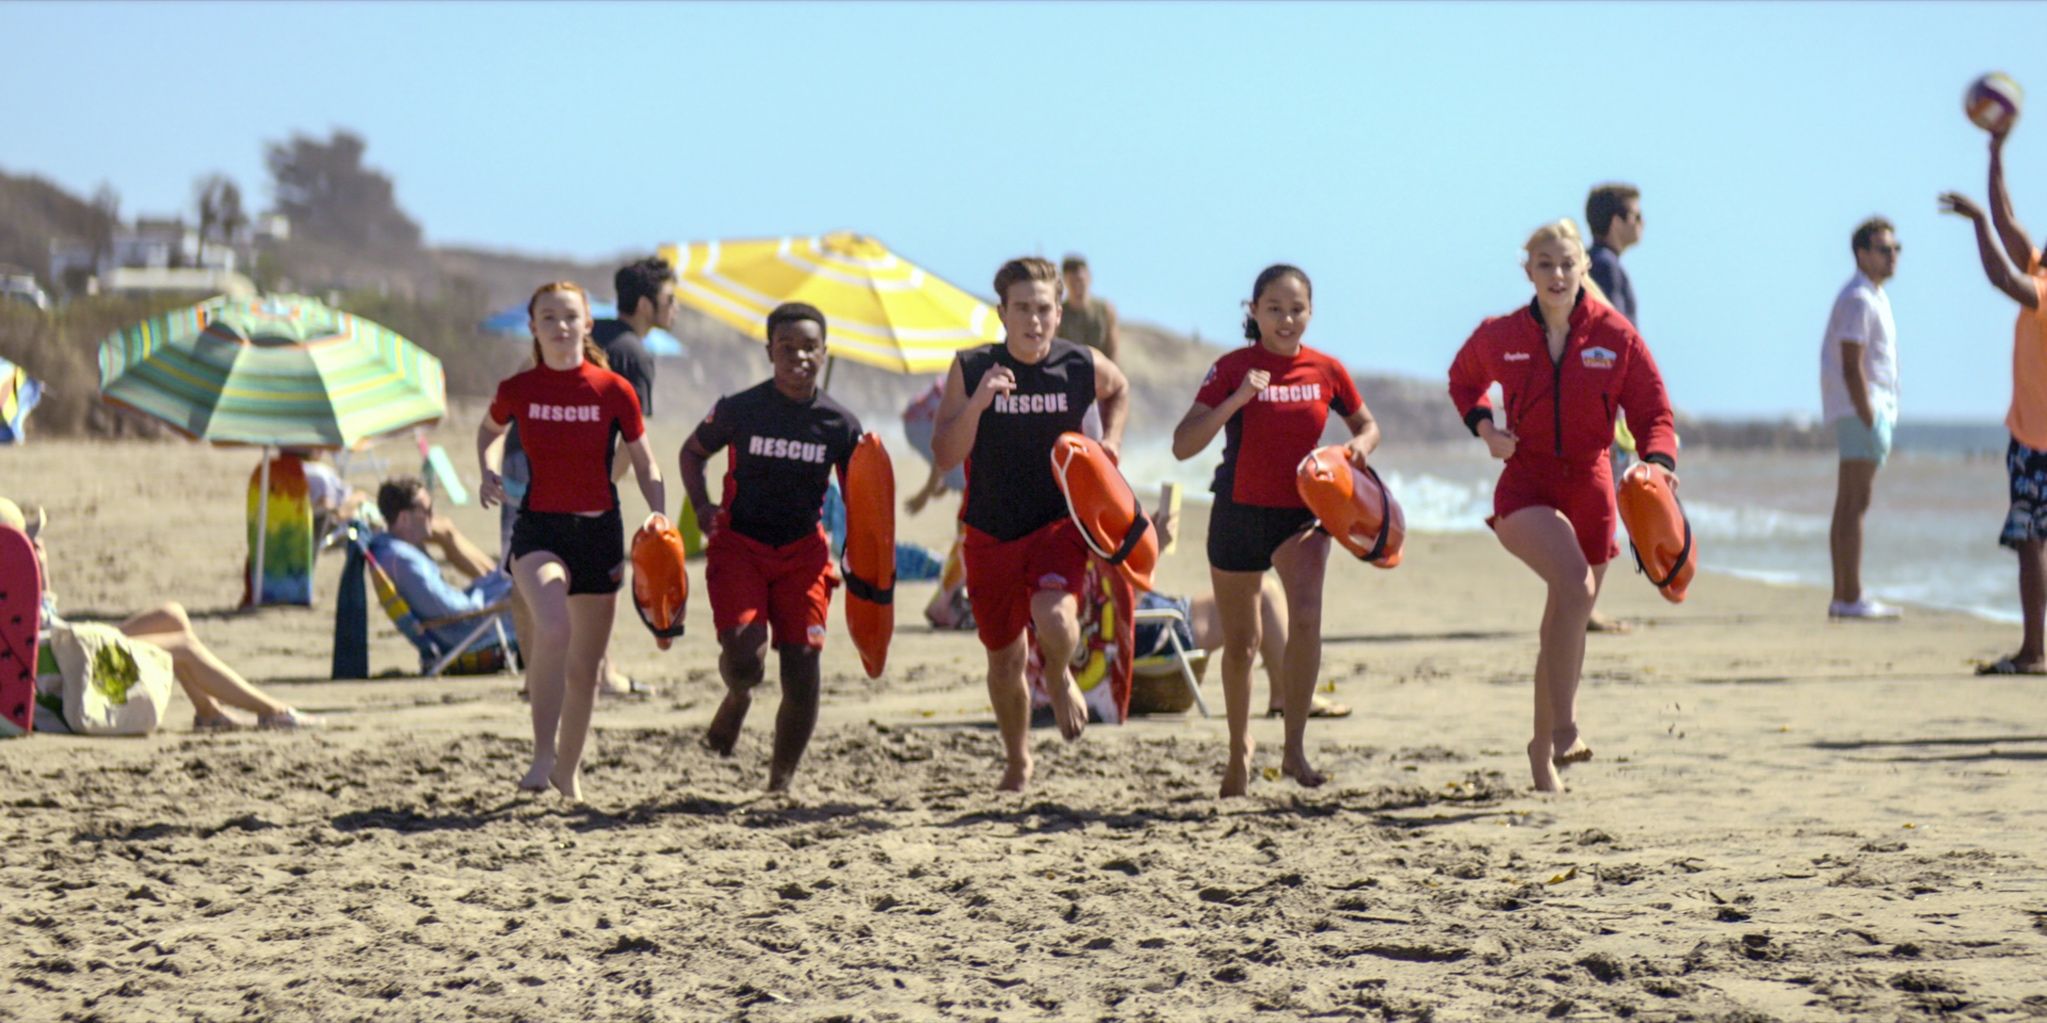 Malibu Rescue First Look Brings Teen Lifeguards To Netflix